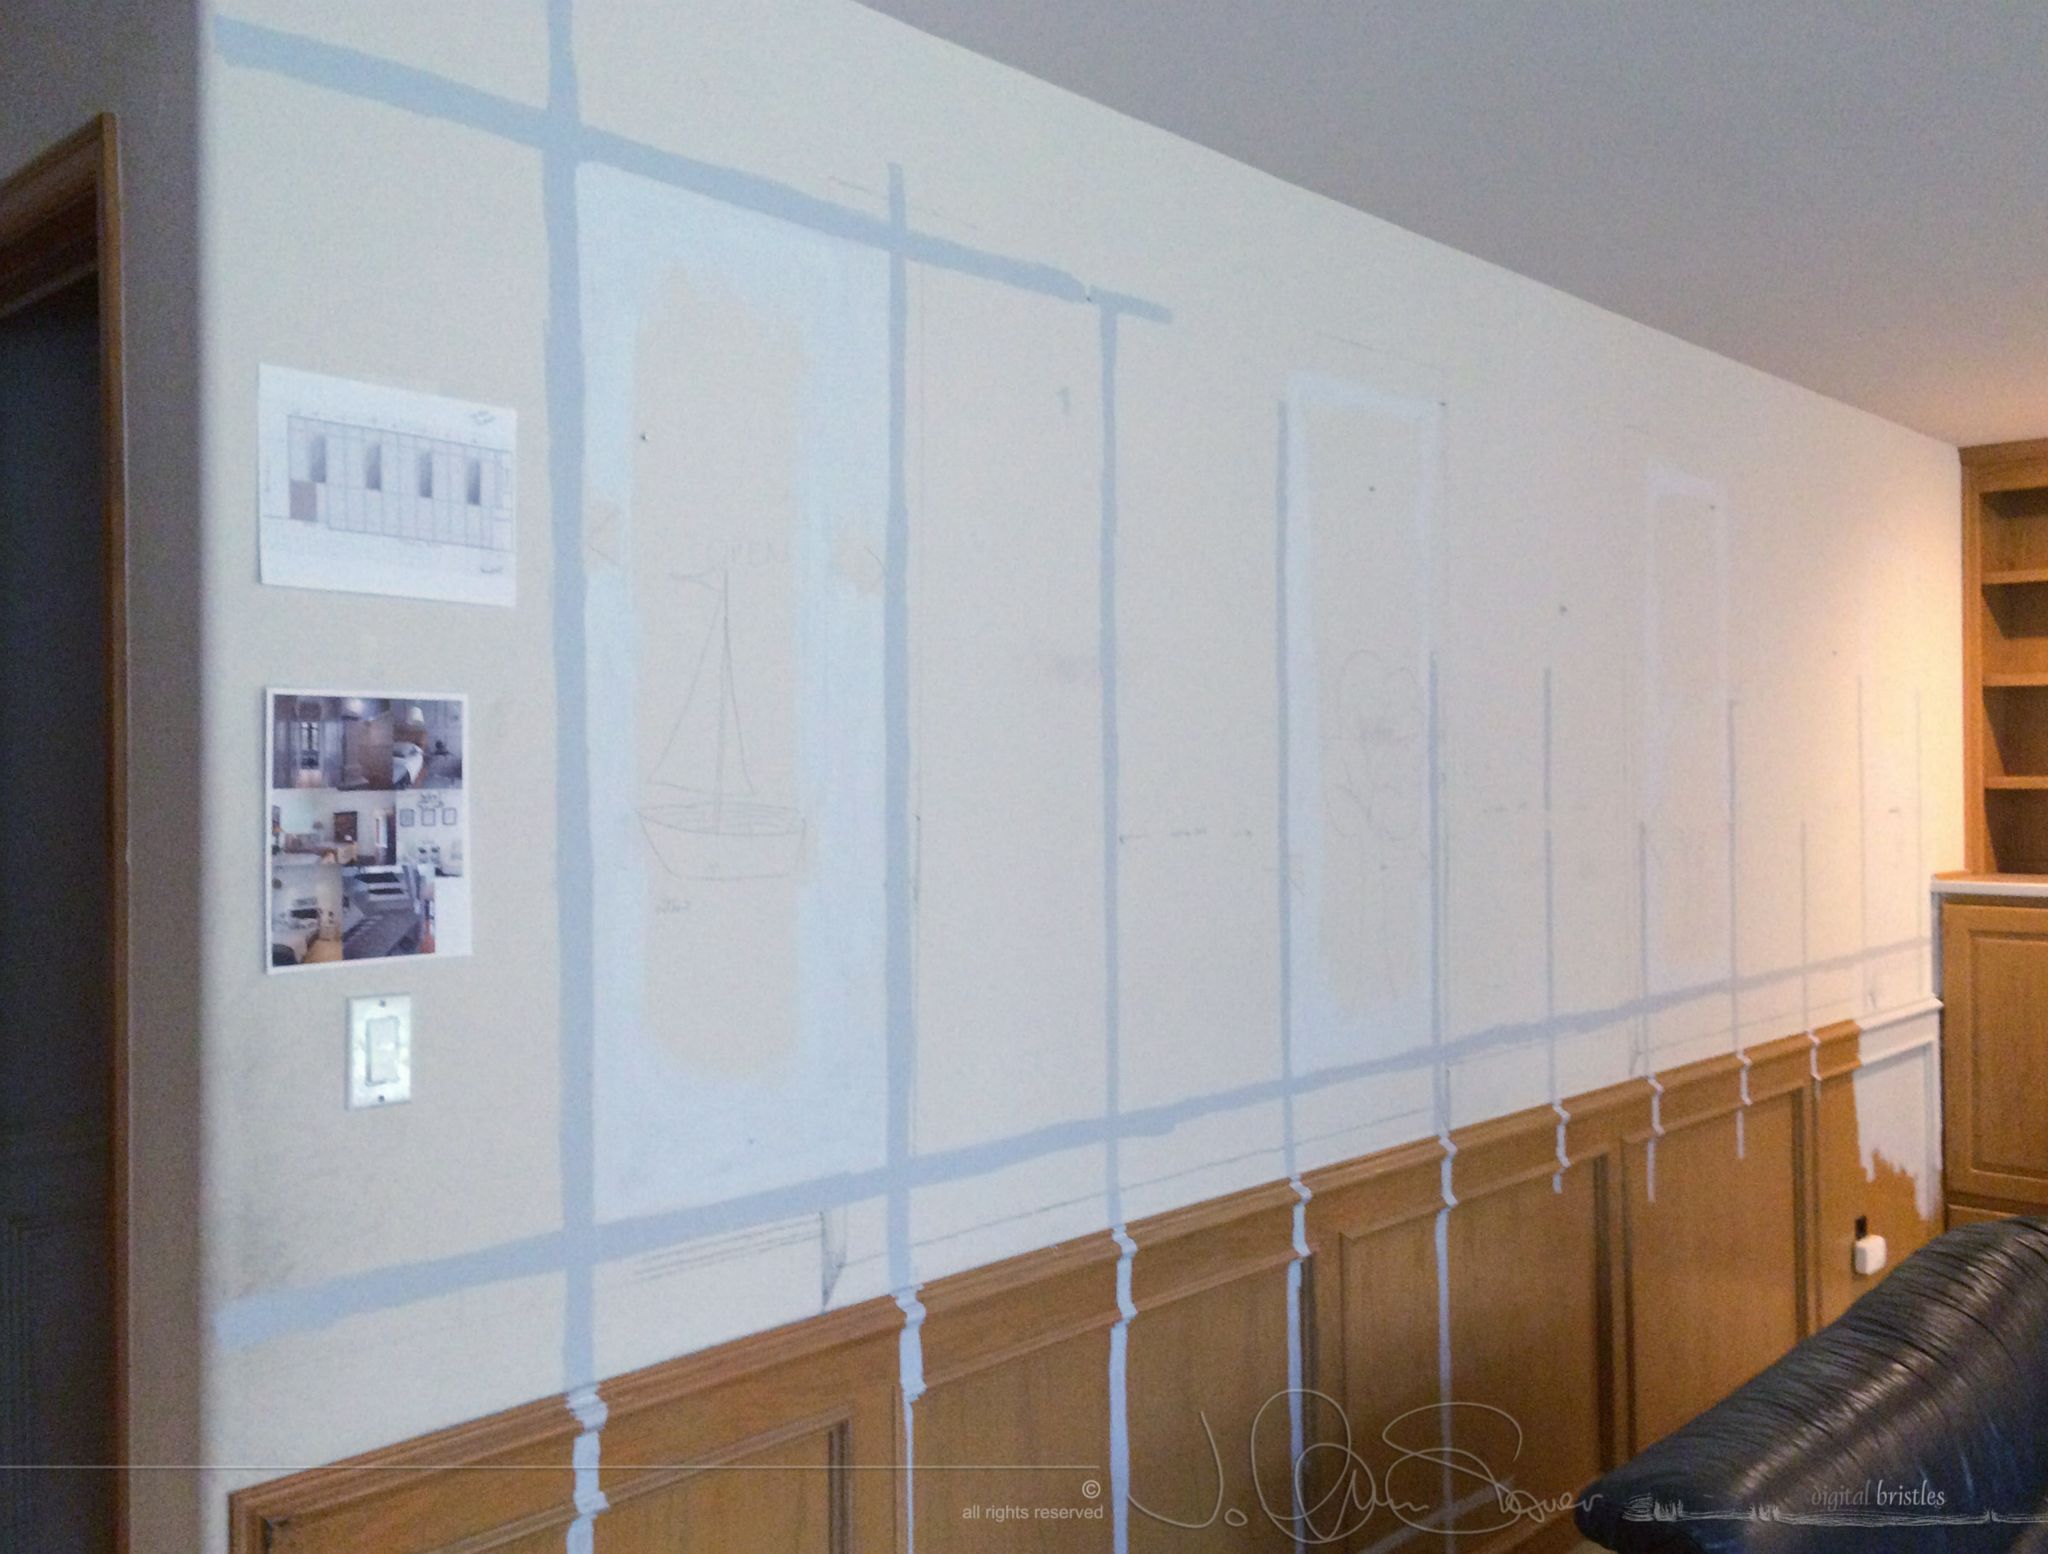 Trying to work out where we can make openings in this wall - feasible + looks good